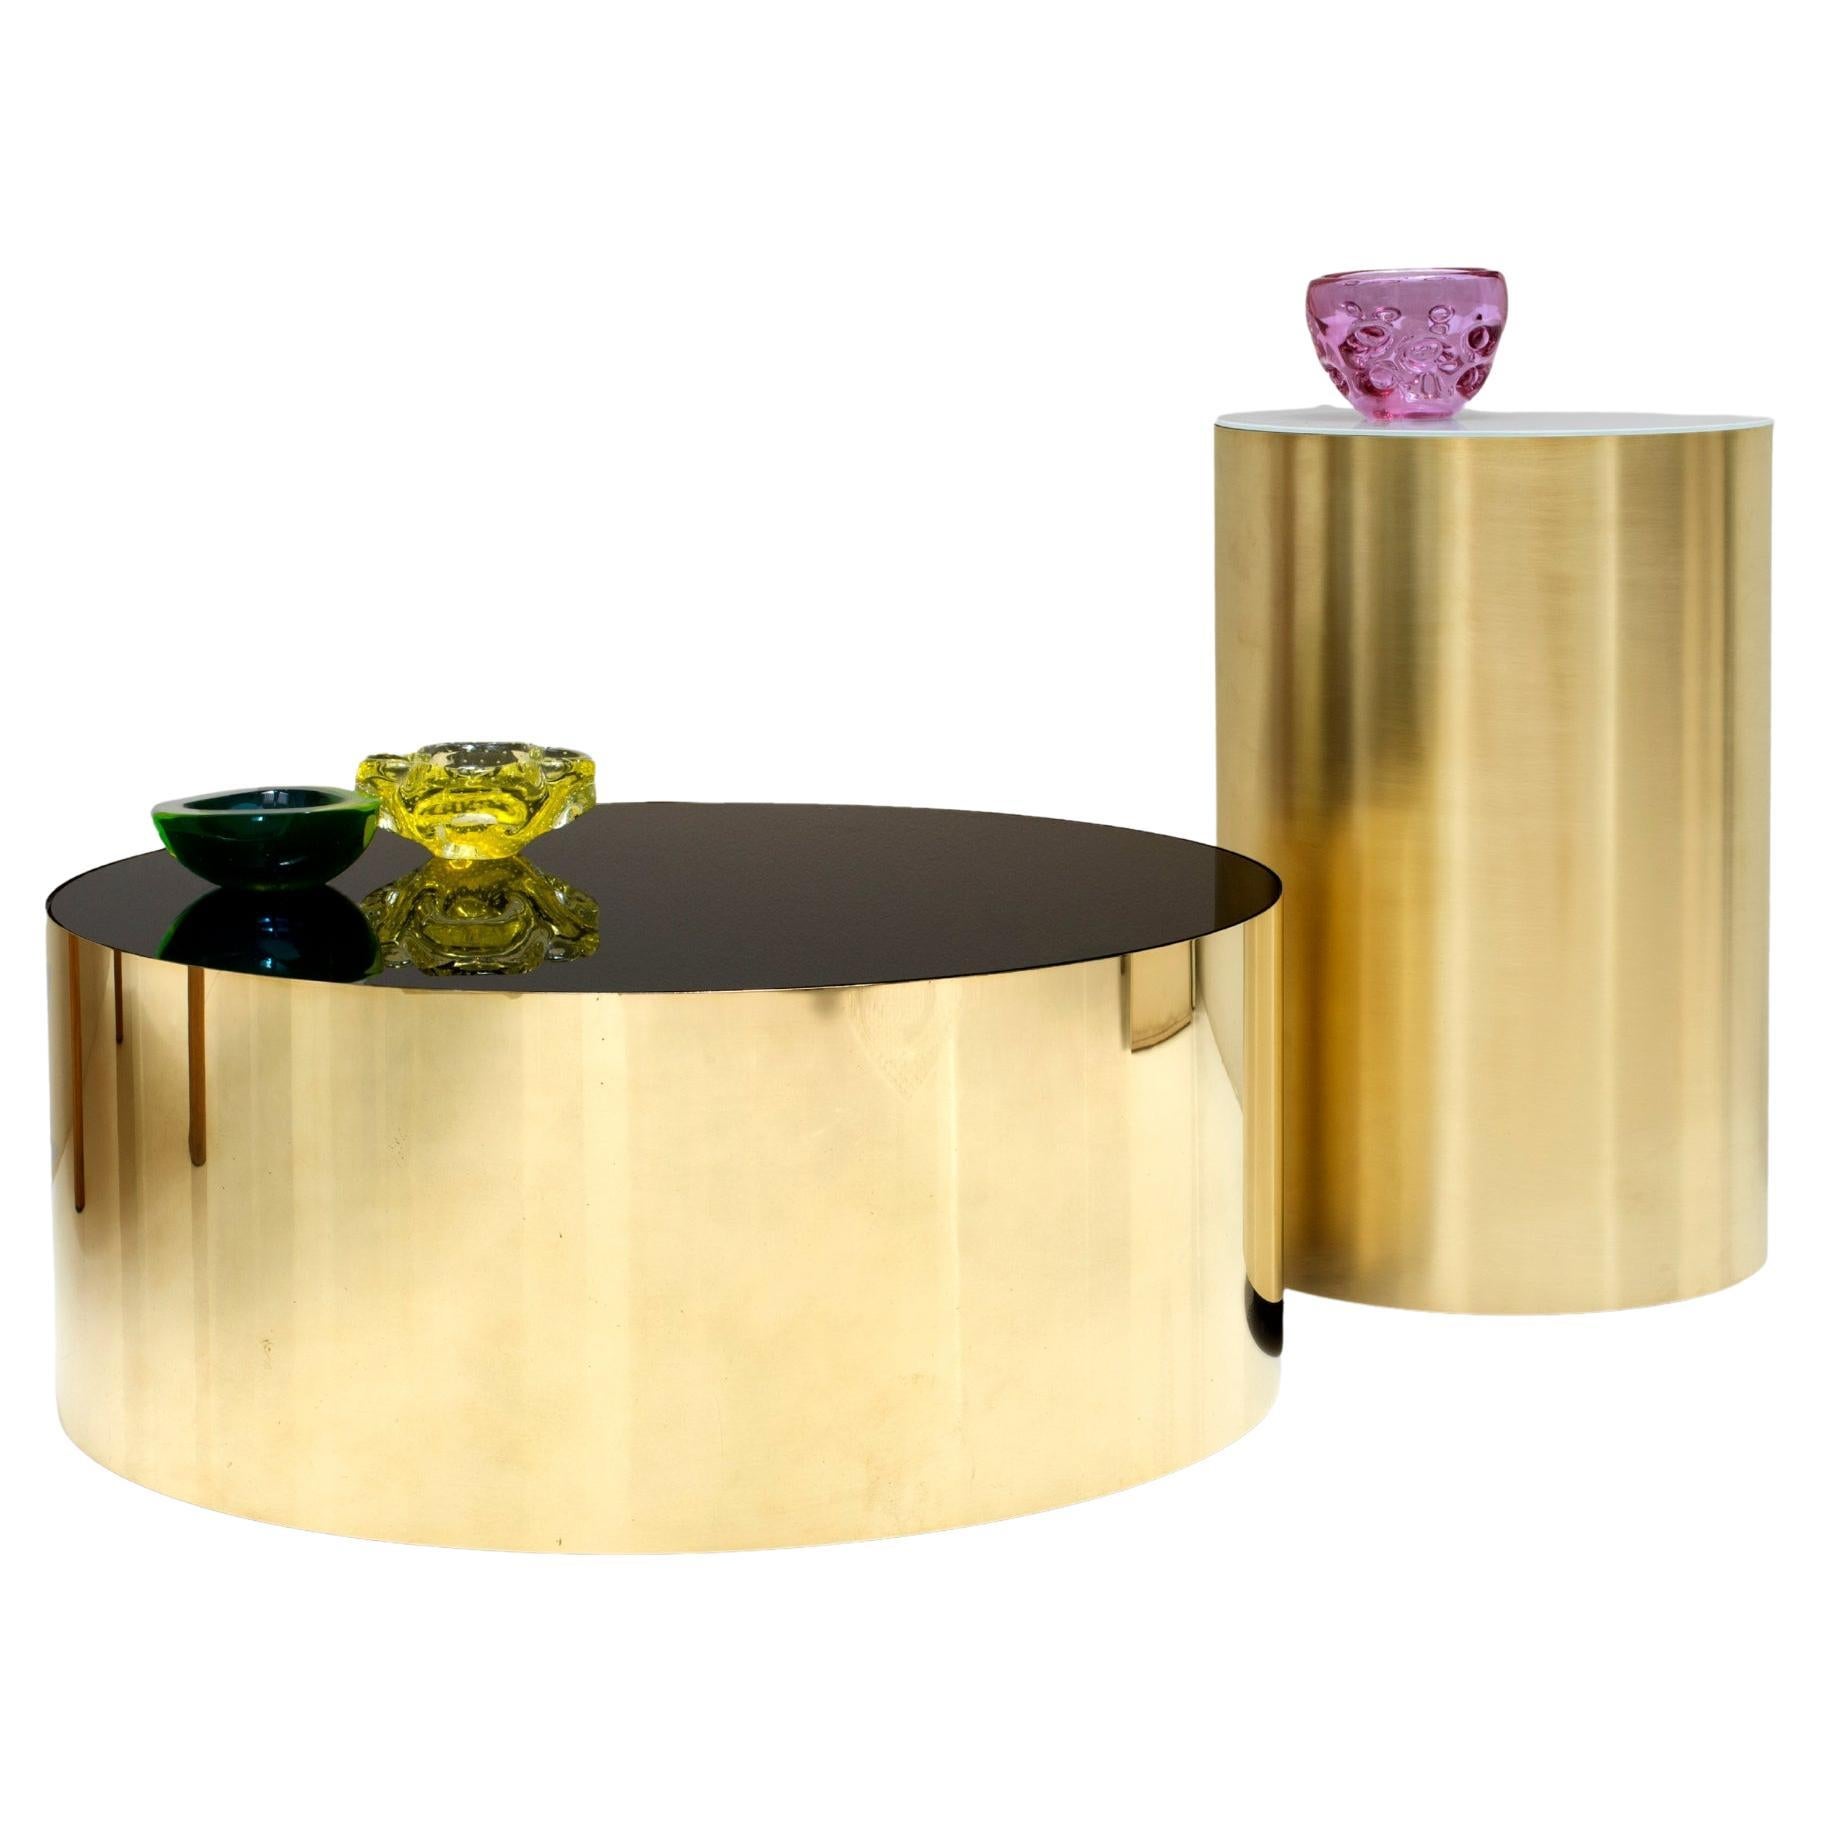 Single Side Table, Full Moon Shape, Brass/Steel & HighGloss Laminate, Size M For Sale